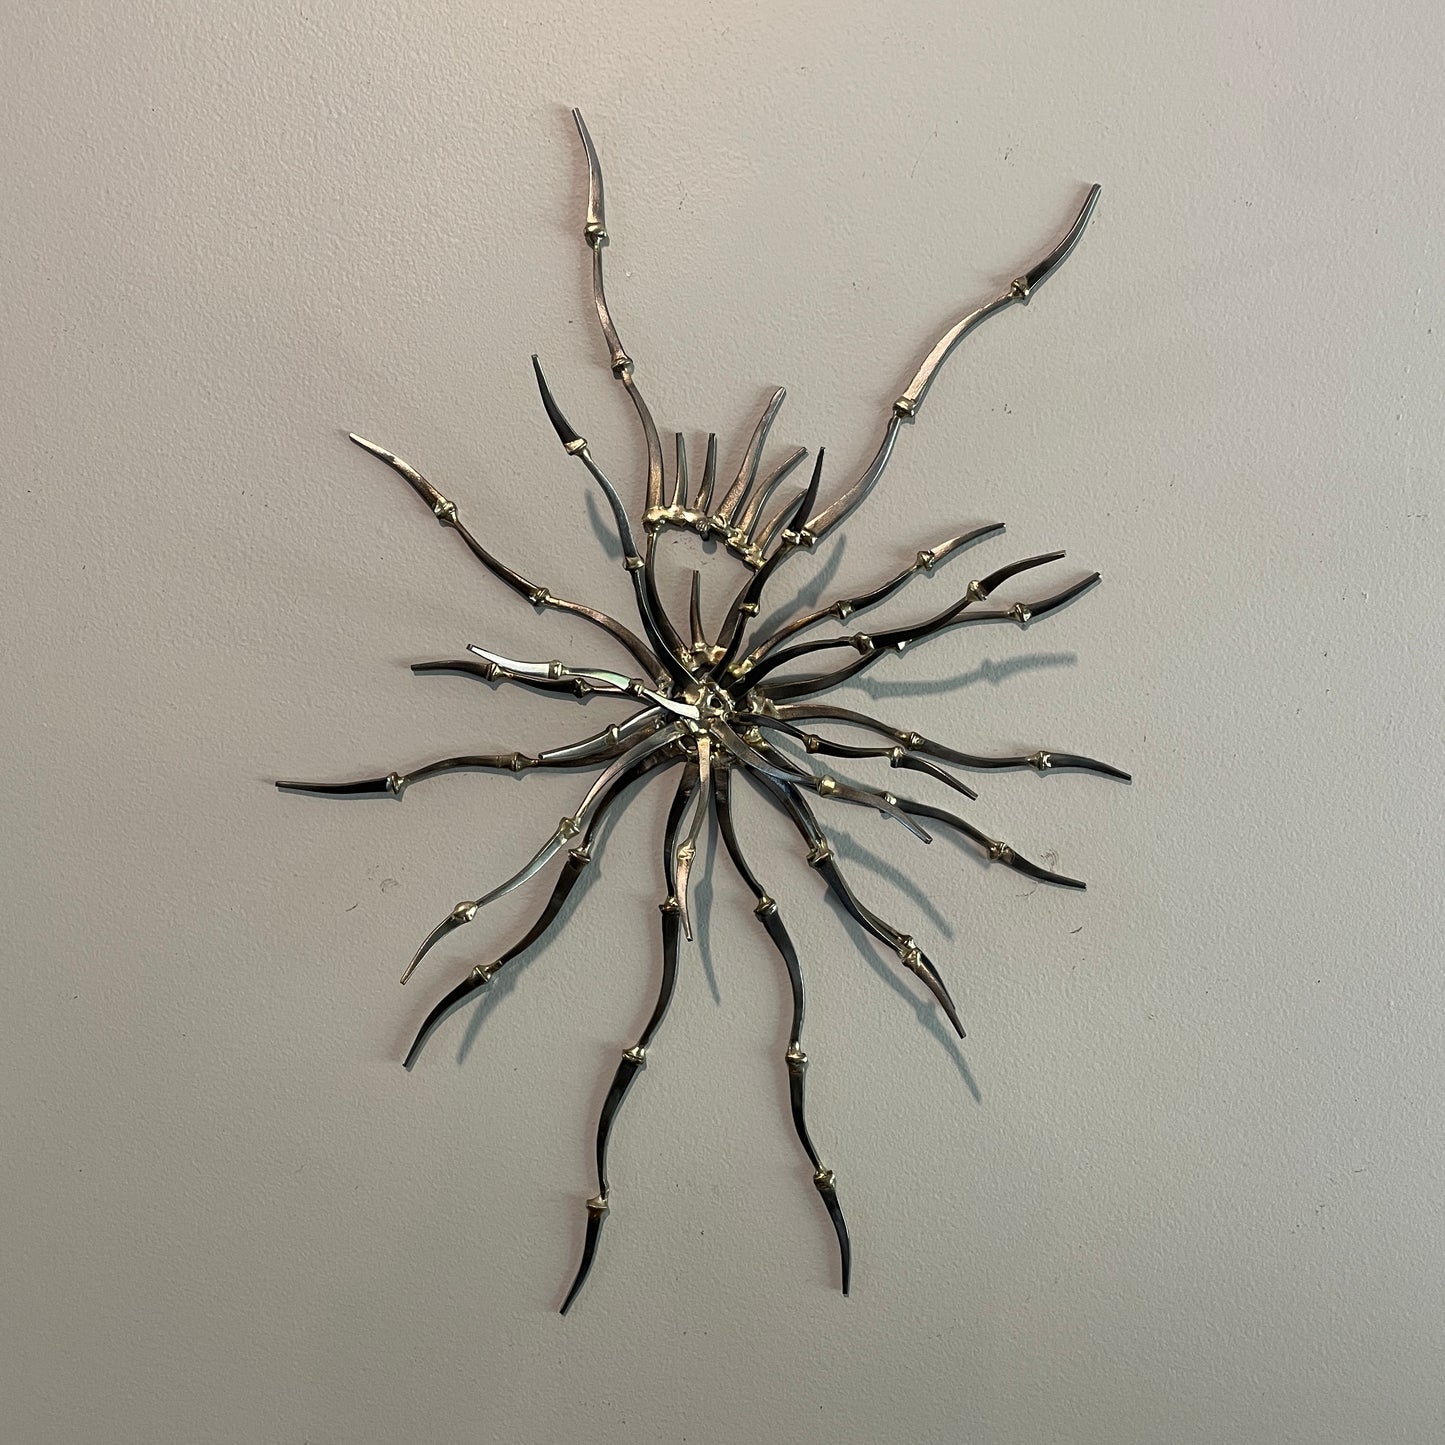 Medusa's Crown - #5 in a series - Brutalist Mid-Century style Metal Wall Sculpture